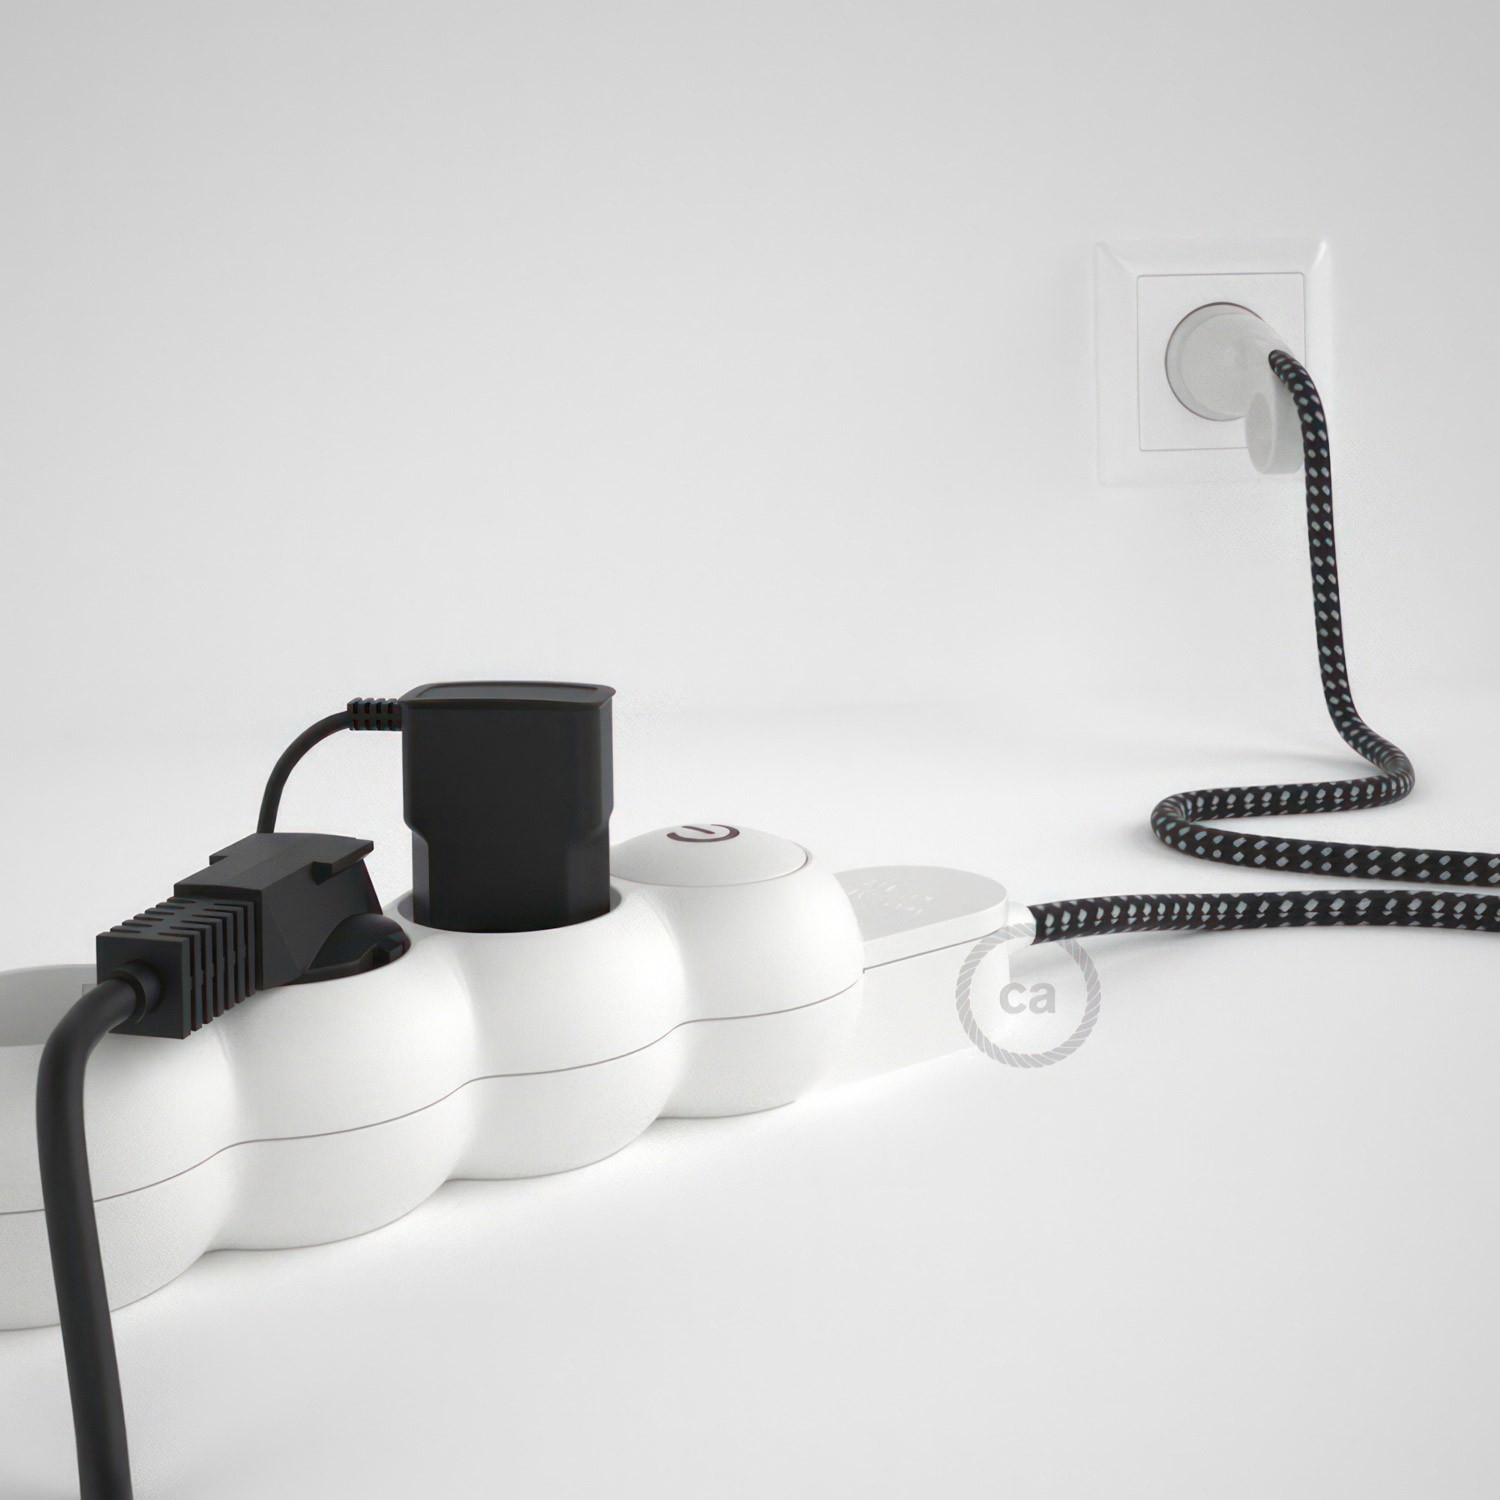 German power strip with electrical cable covered in 3D effect fabric RT41 Stars and Schuko plug with confort ring